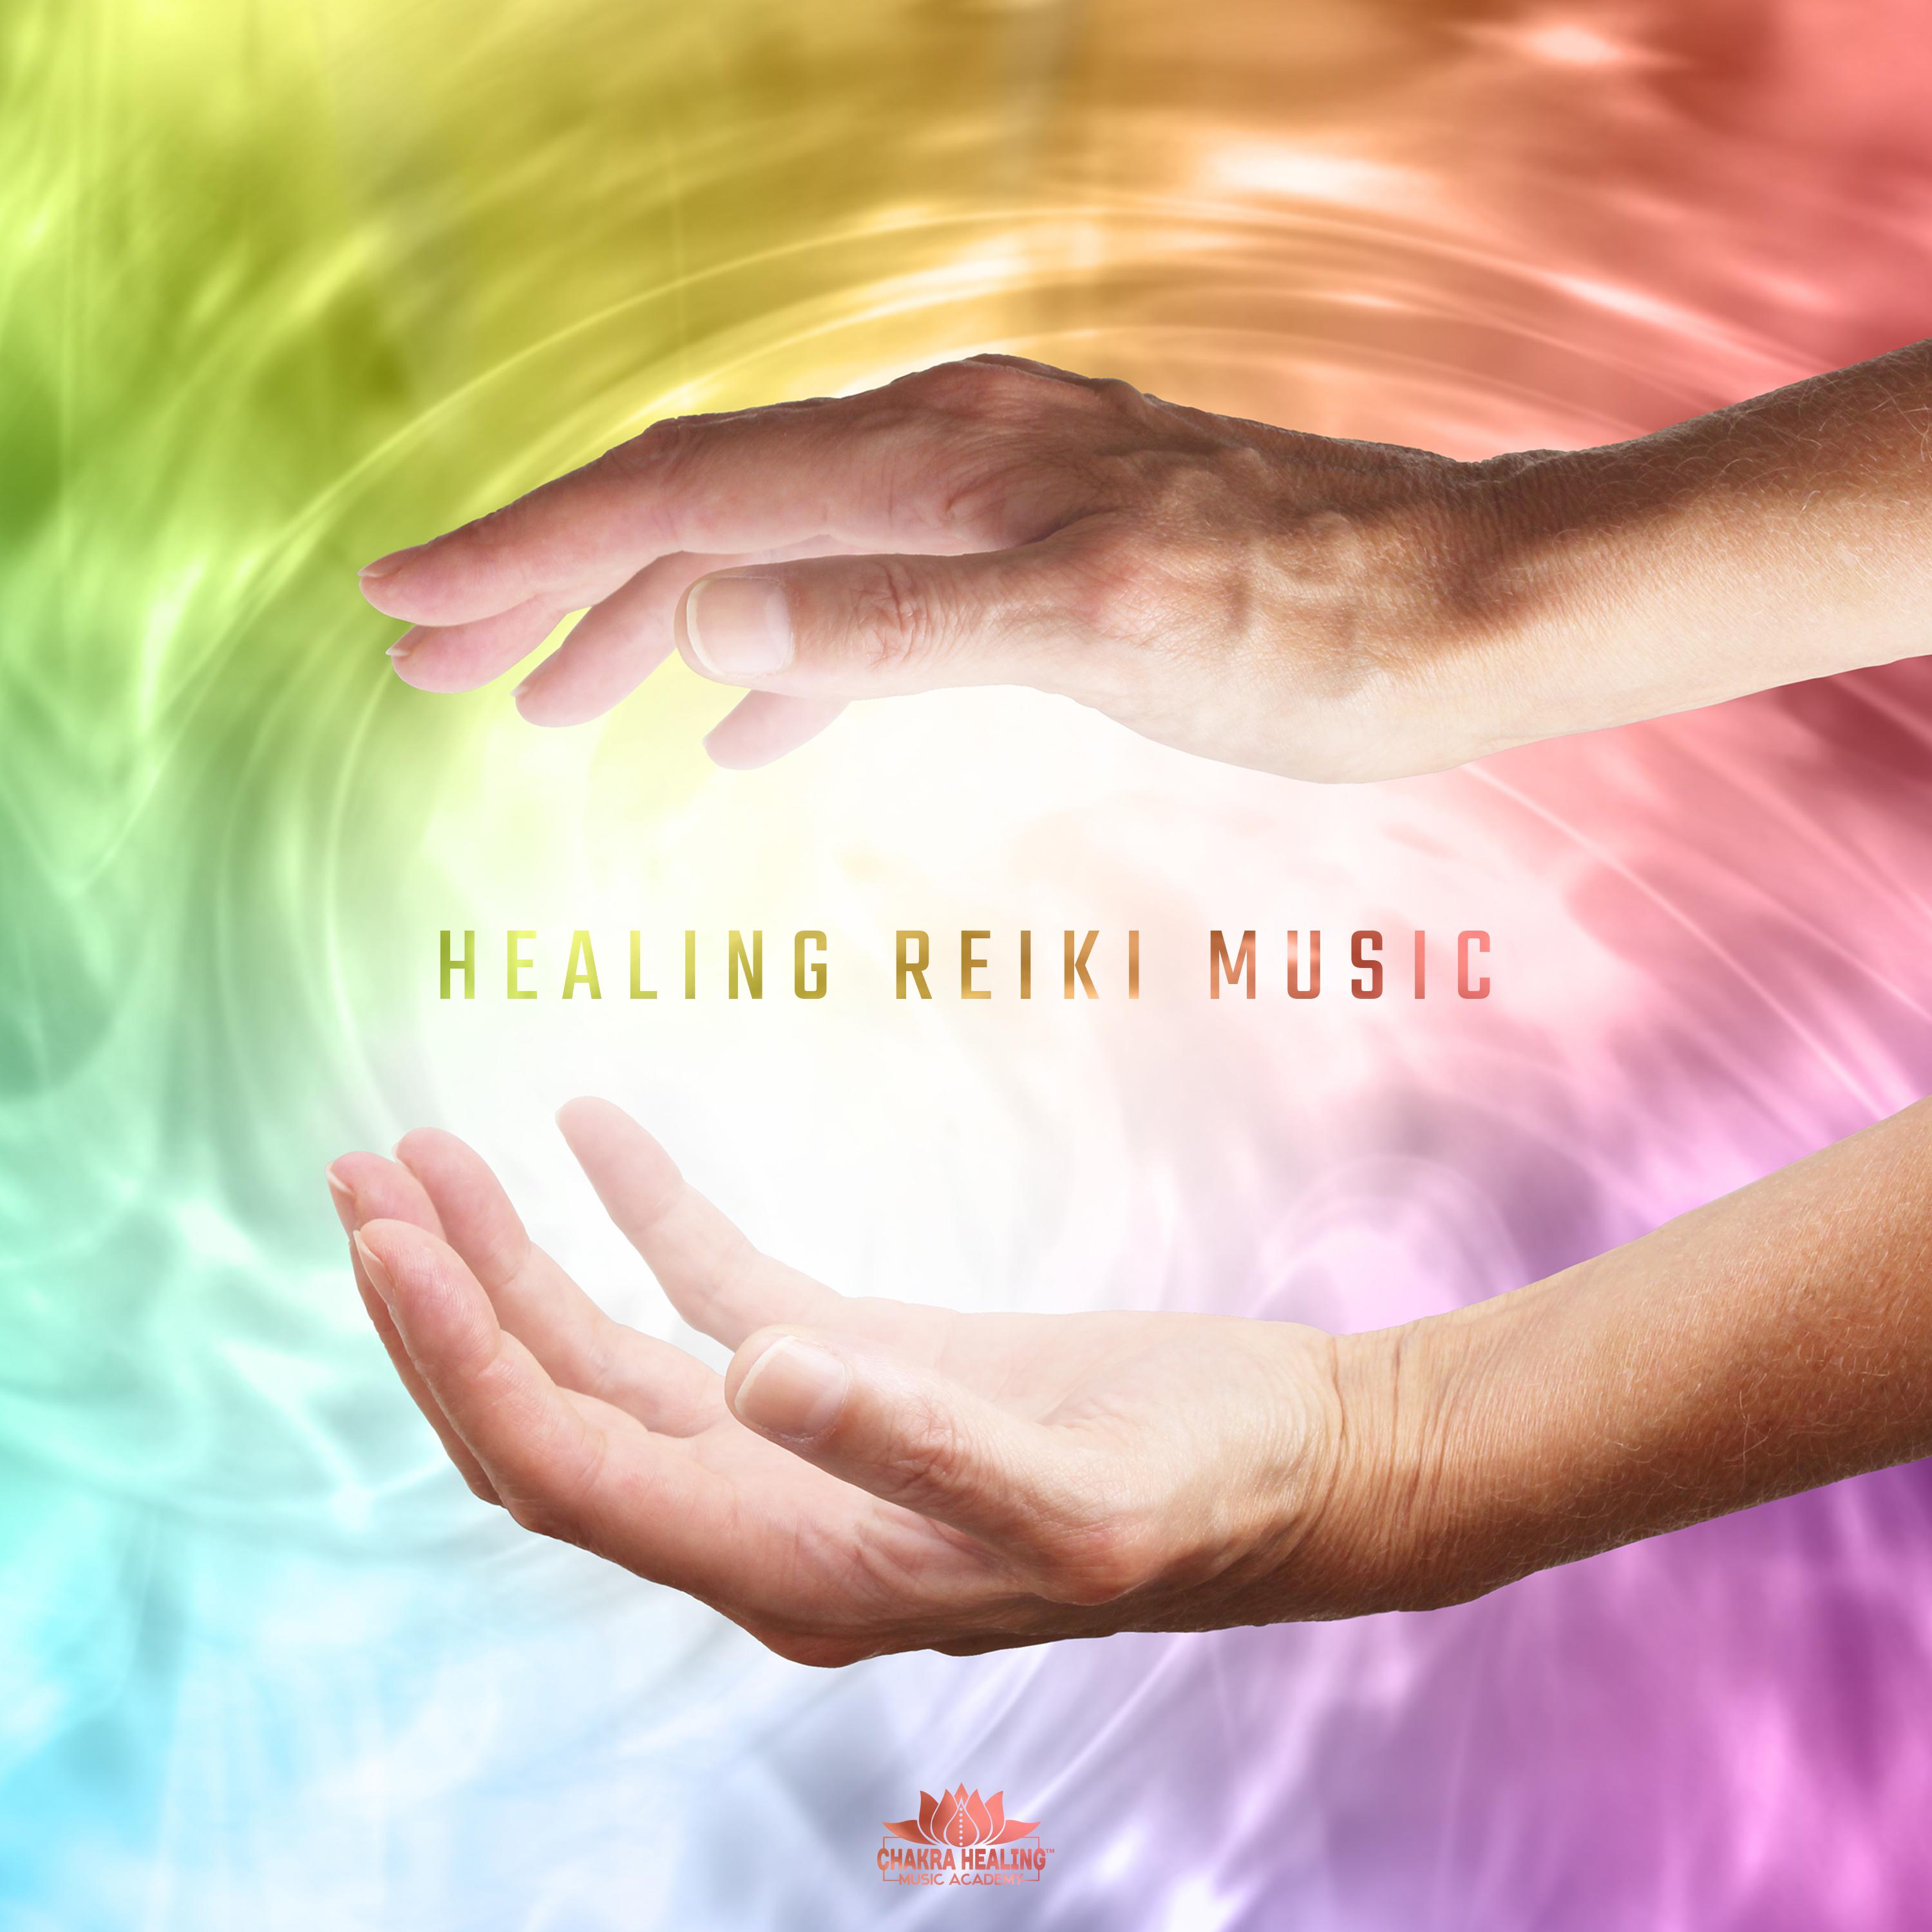 Healing Reiki Music (Oriental Music for Mindfulness, Soul Relaxation, Stress Relief, Yoga, Deep Meditation)